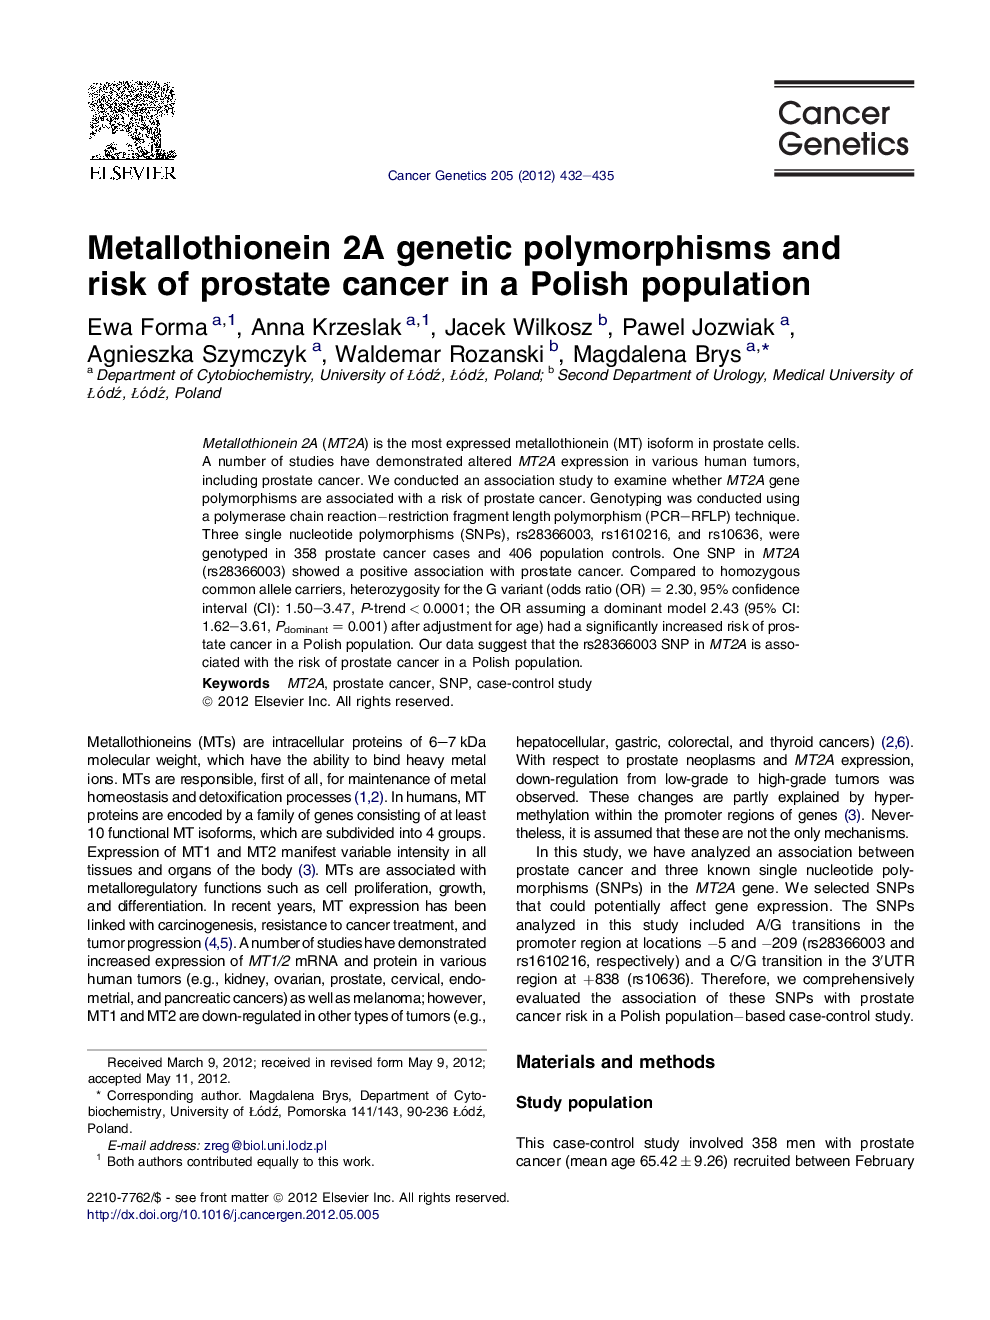 Metallothionein 2A genetic polymorphisms and risk of prostate cancer in a Polish population